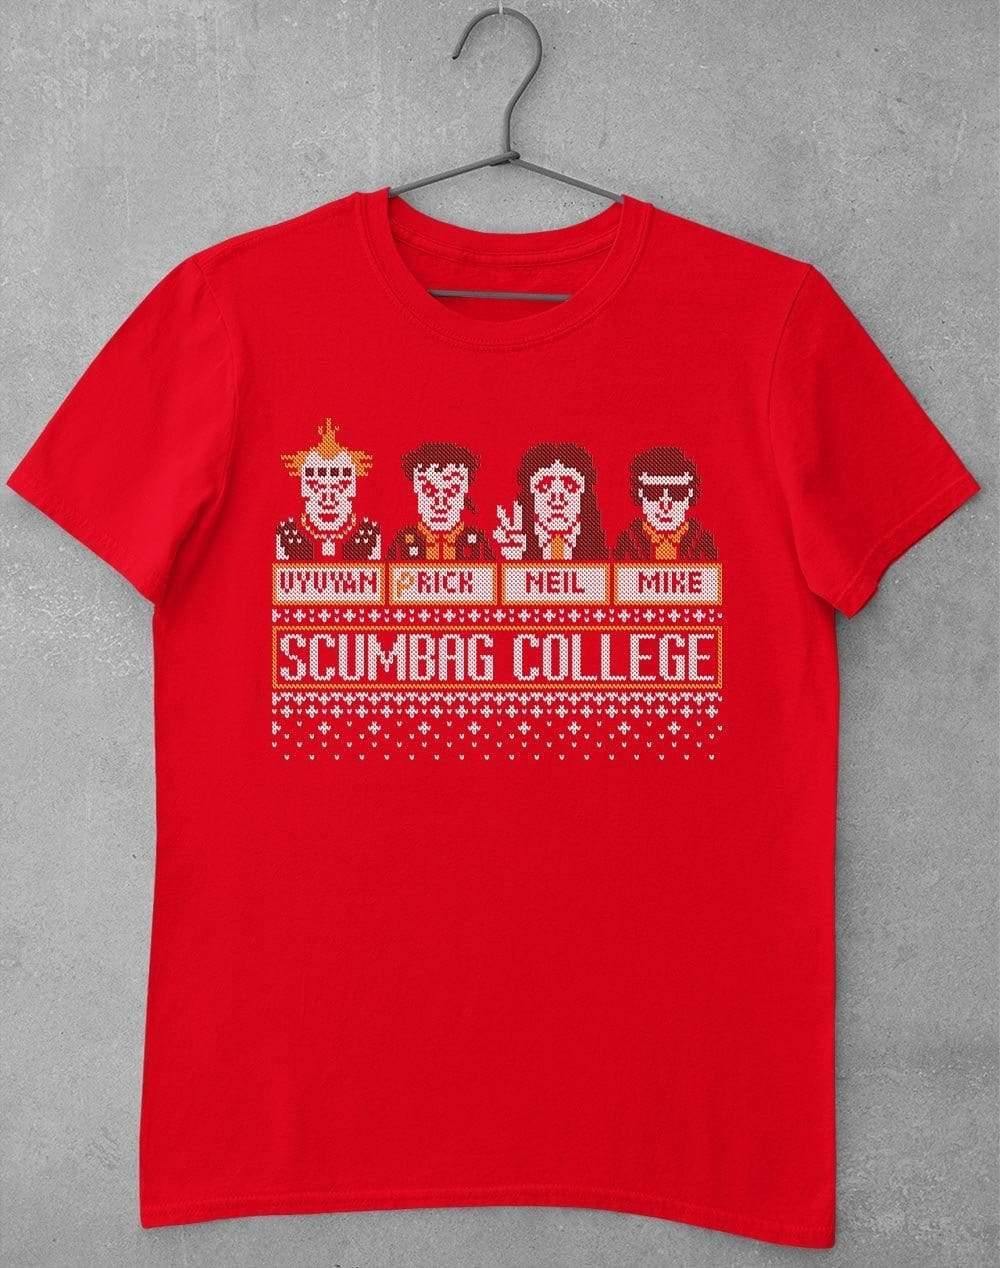 Scumbag College Festive Knitted-Look T-Shirt S / Red  - Off World Tees